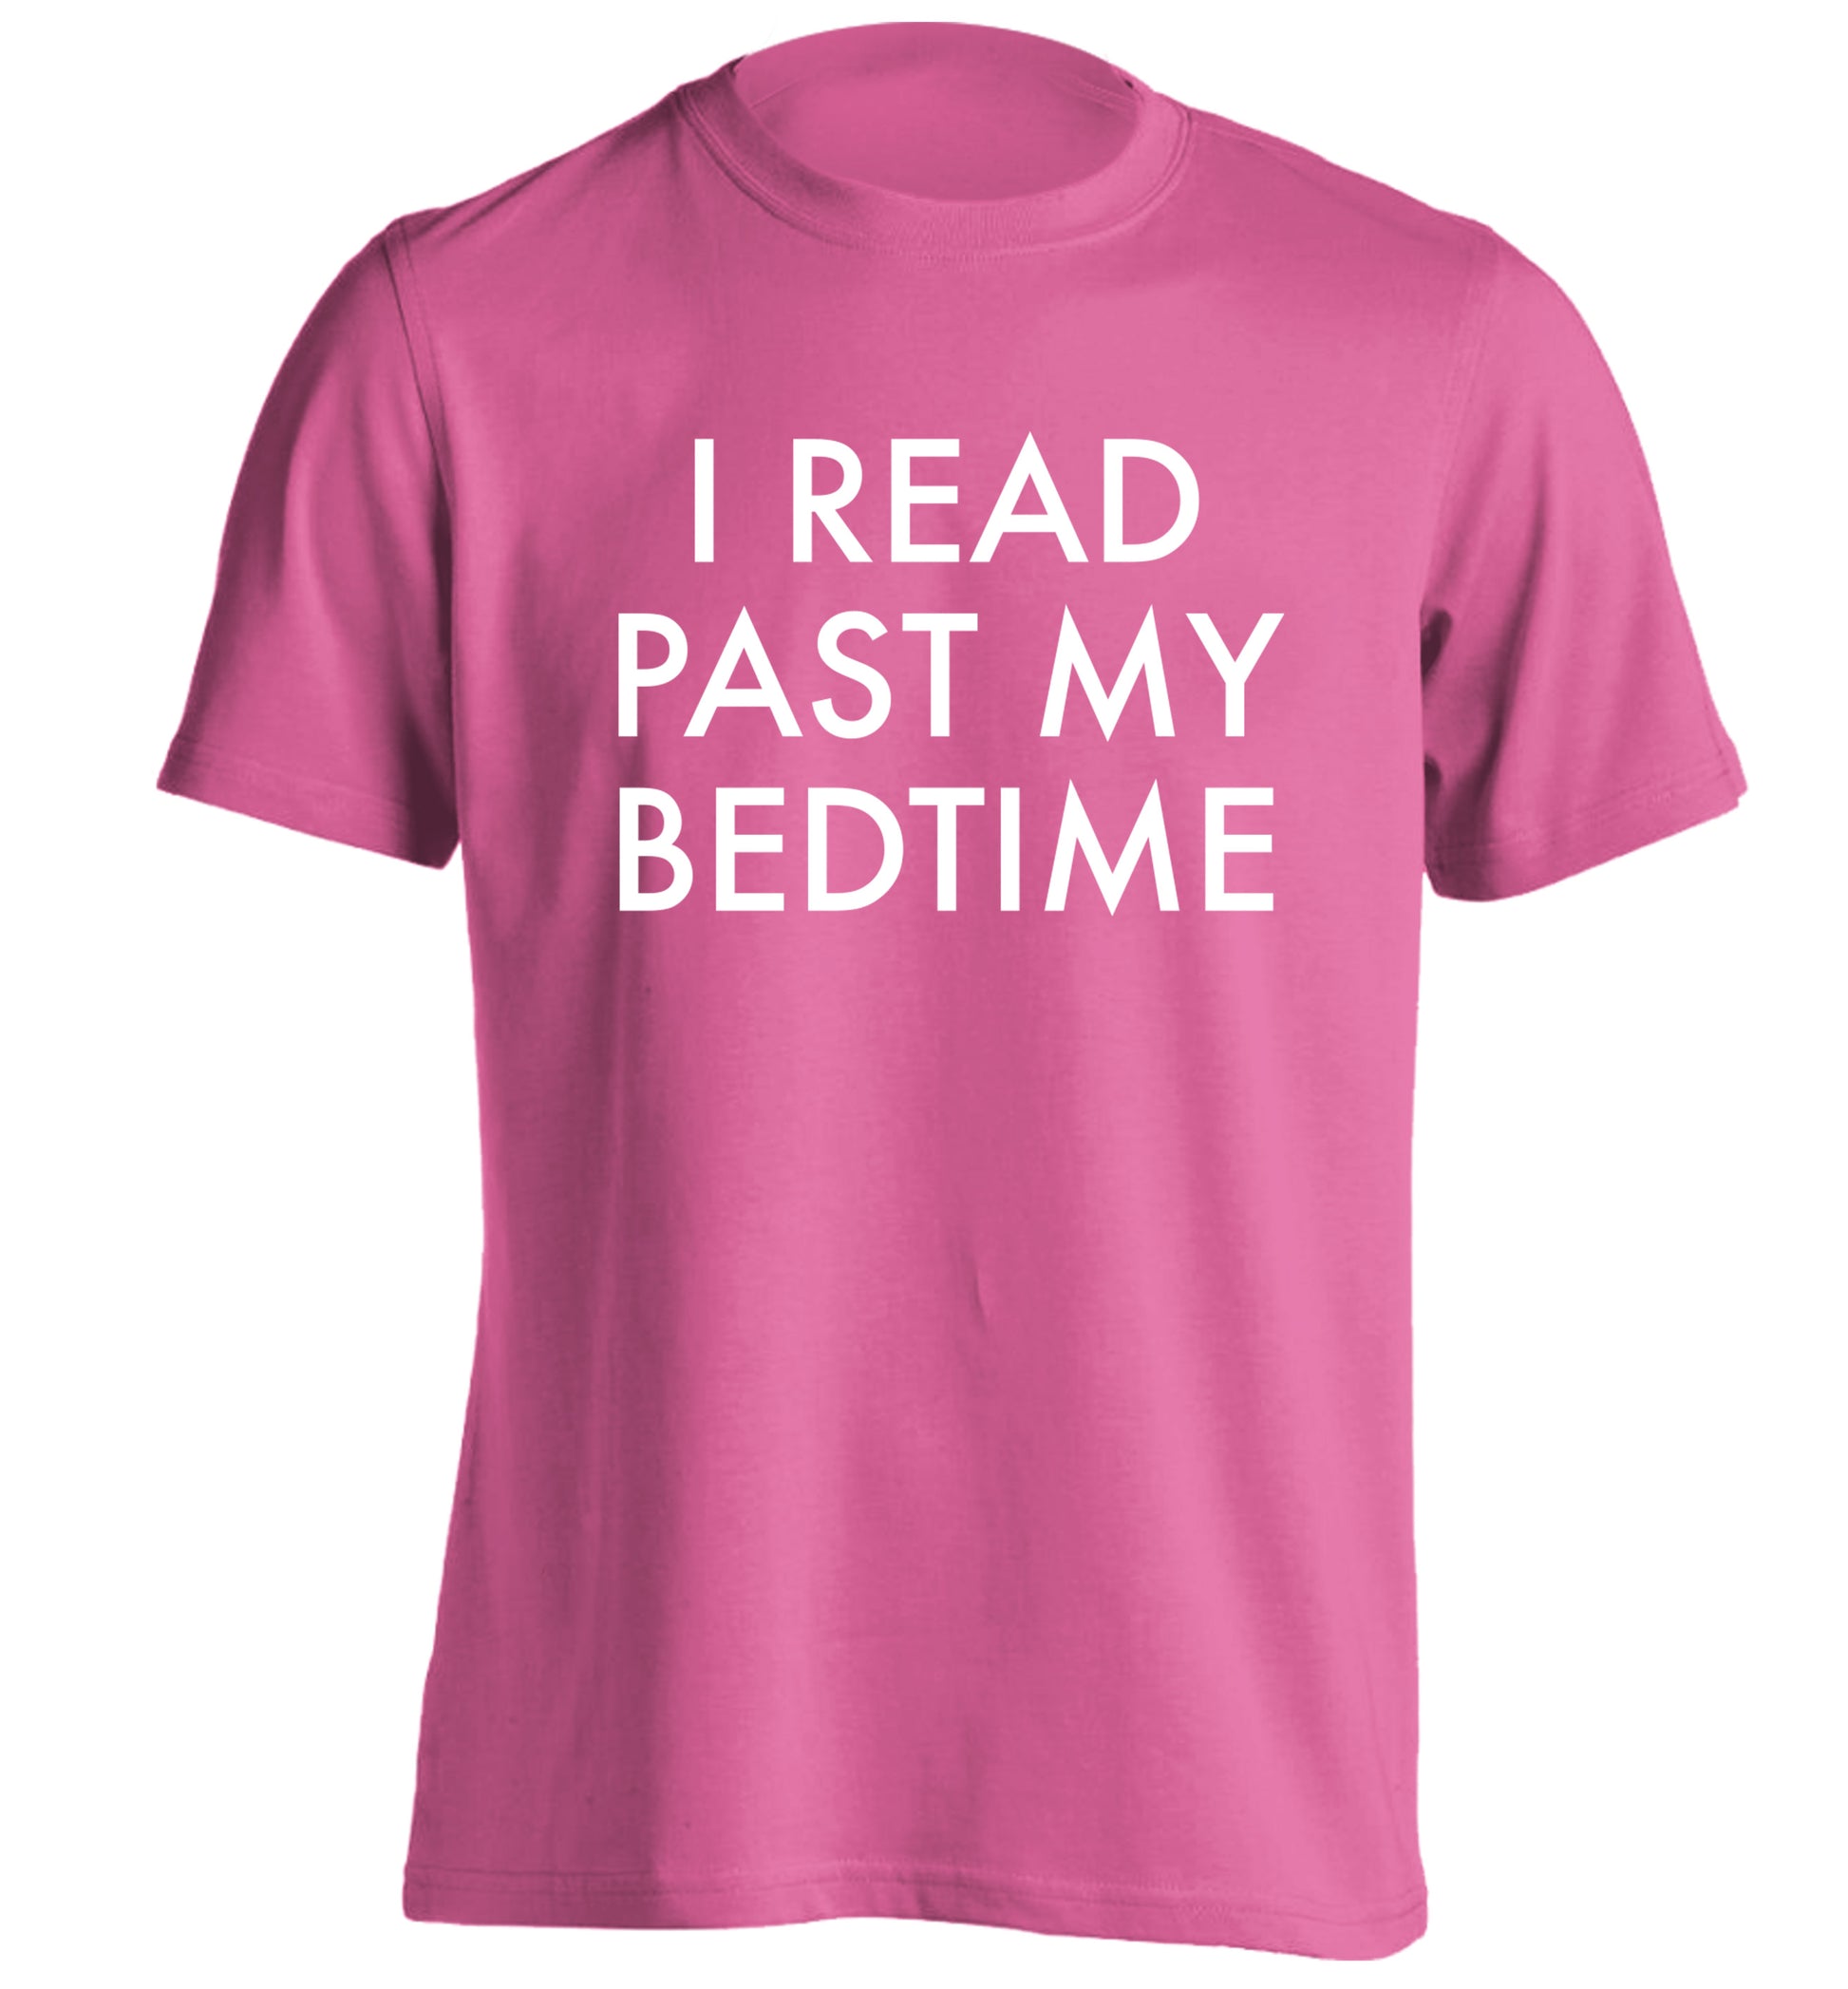 I read past my bedtime adults unisex pink Tshirt 2XL